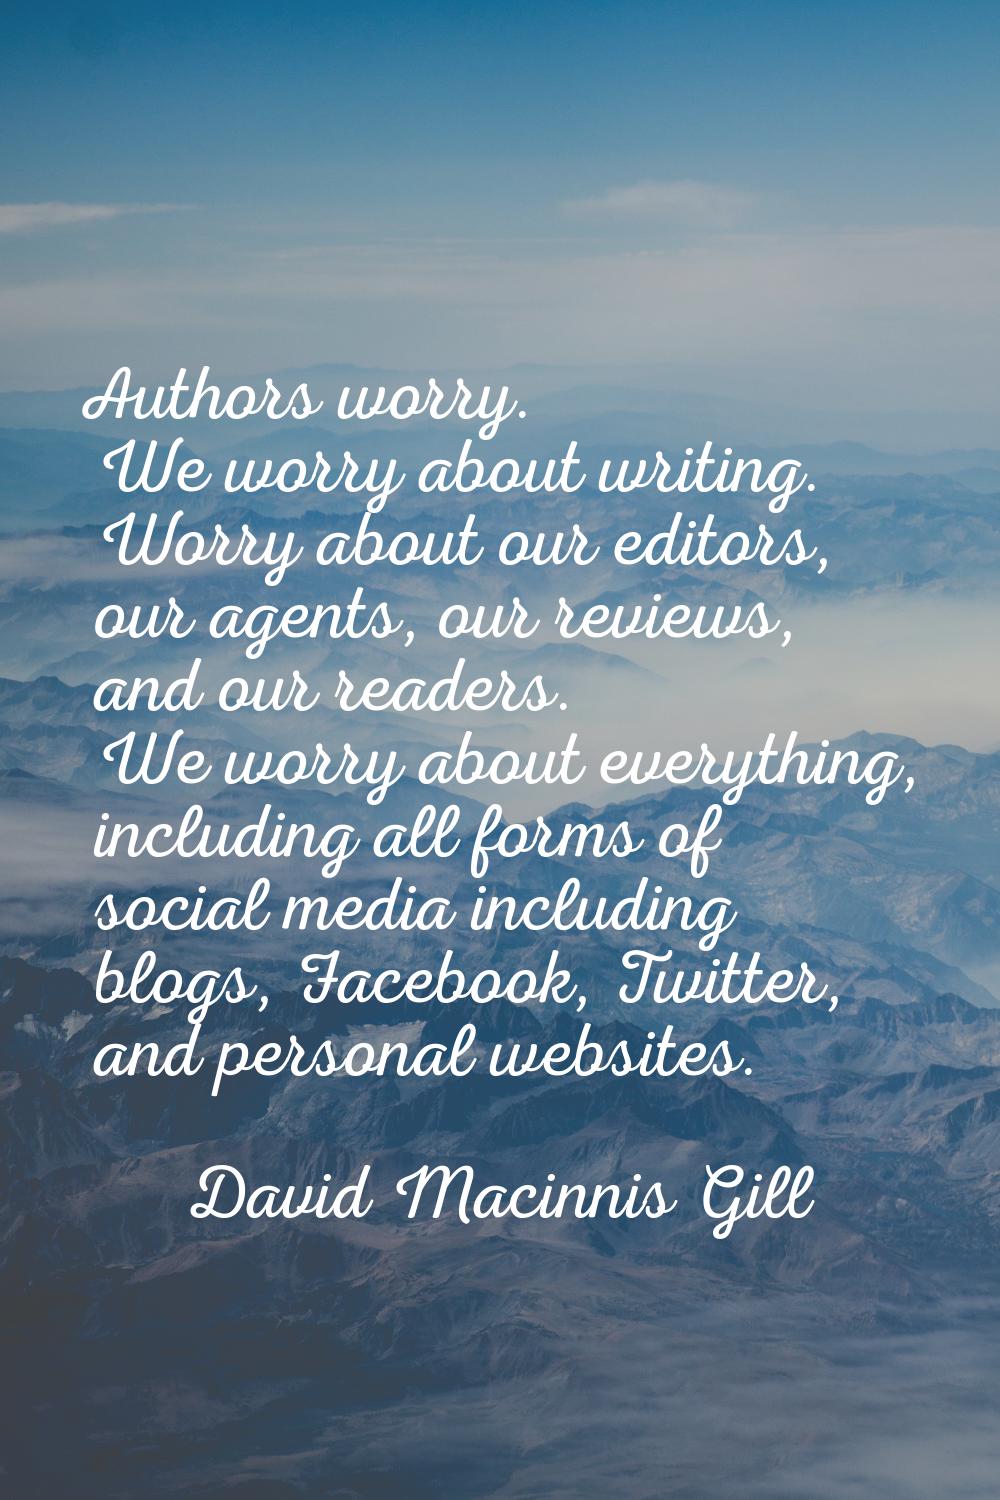 Authors worry. We worry about writing. Worry about our editors, our agents, our reviews, and our re